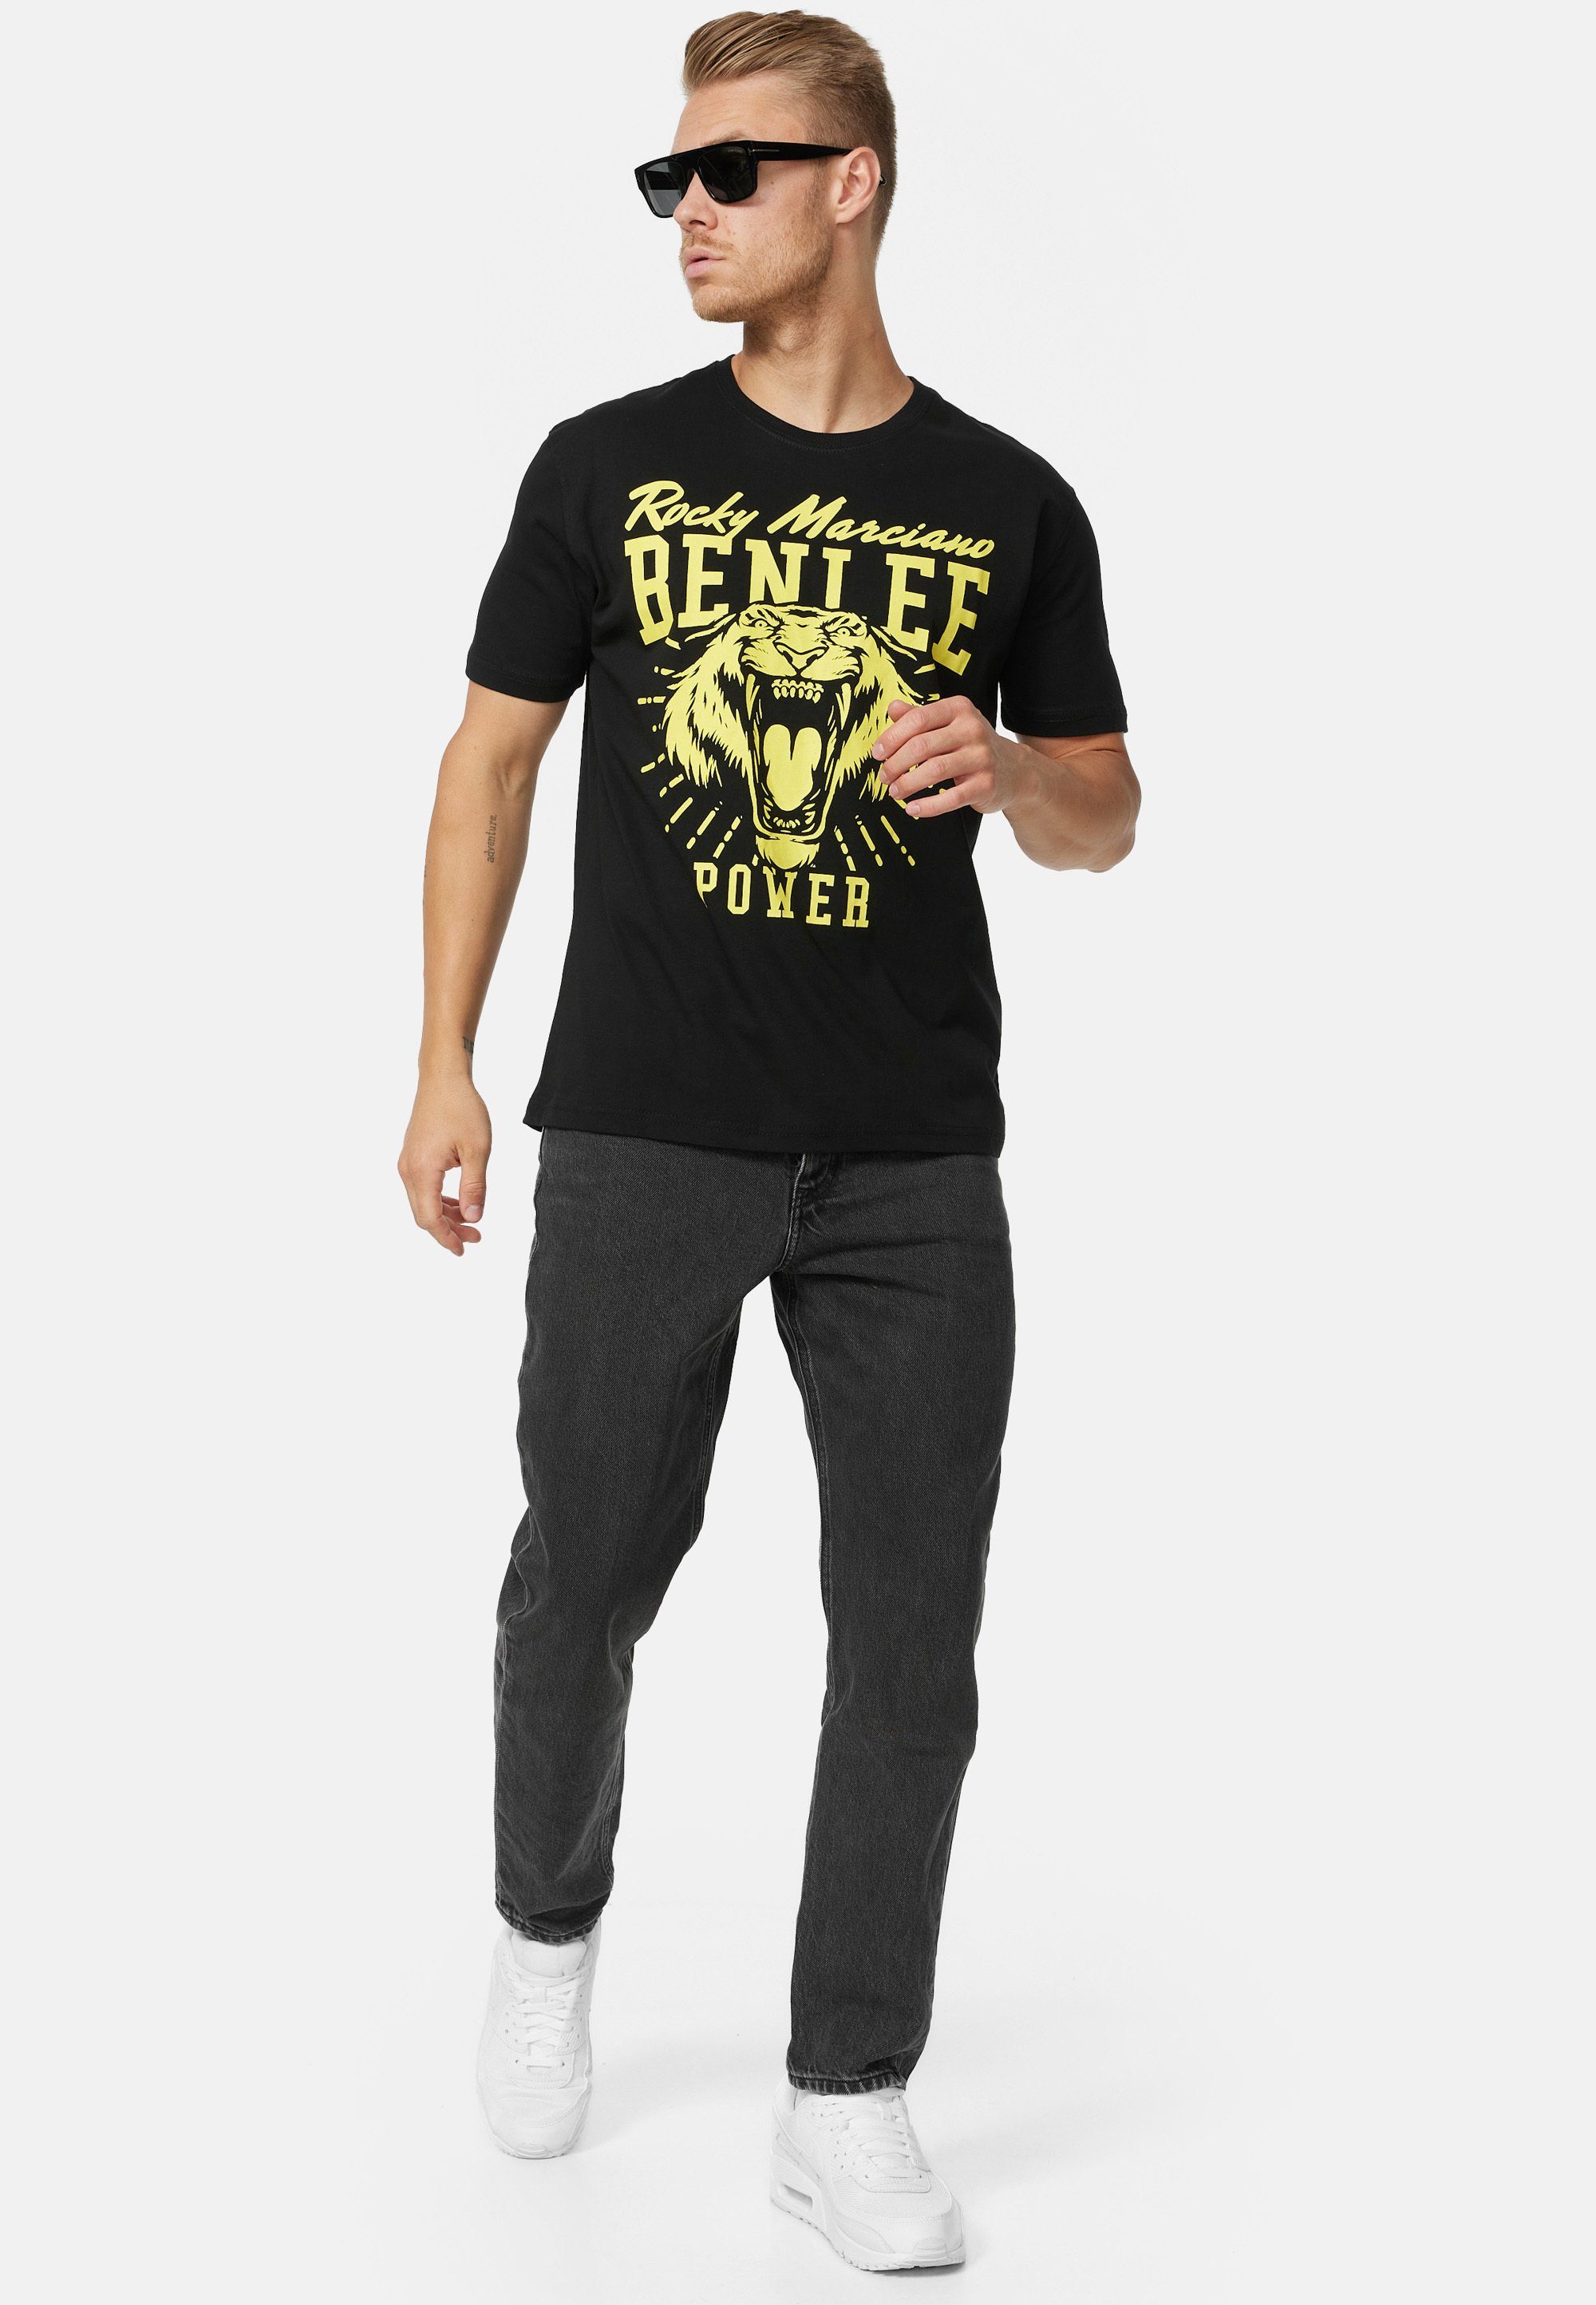 T-Shirt Benlee Black/Yellow POWER Rocky Marciano TIGER